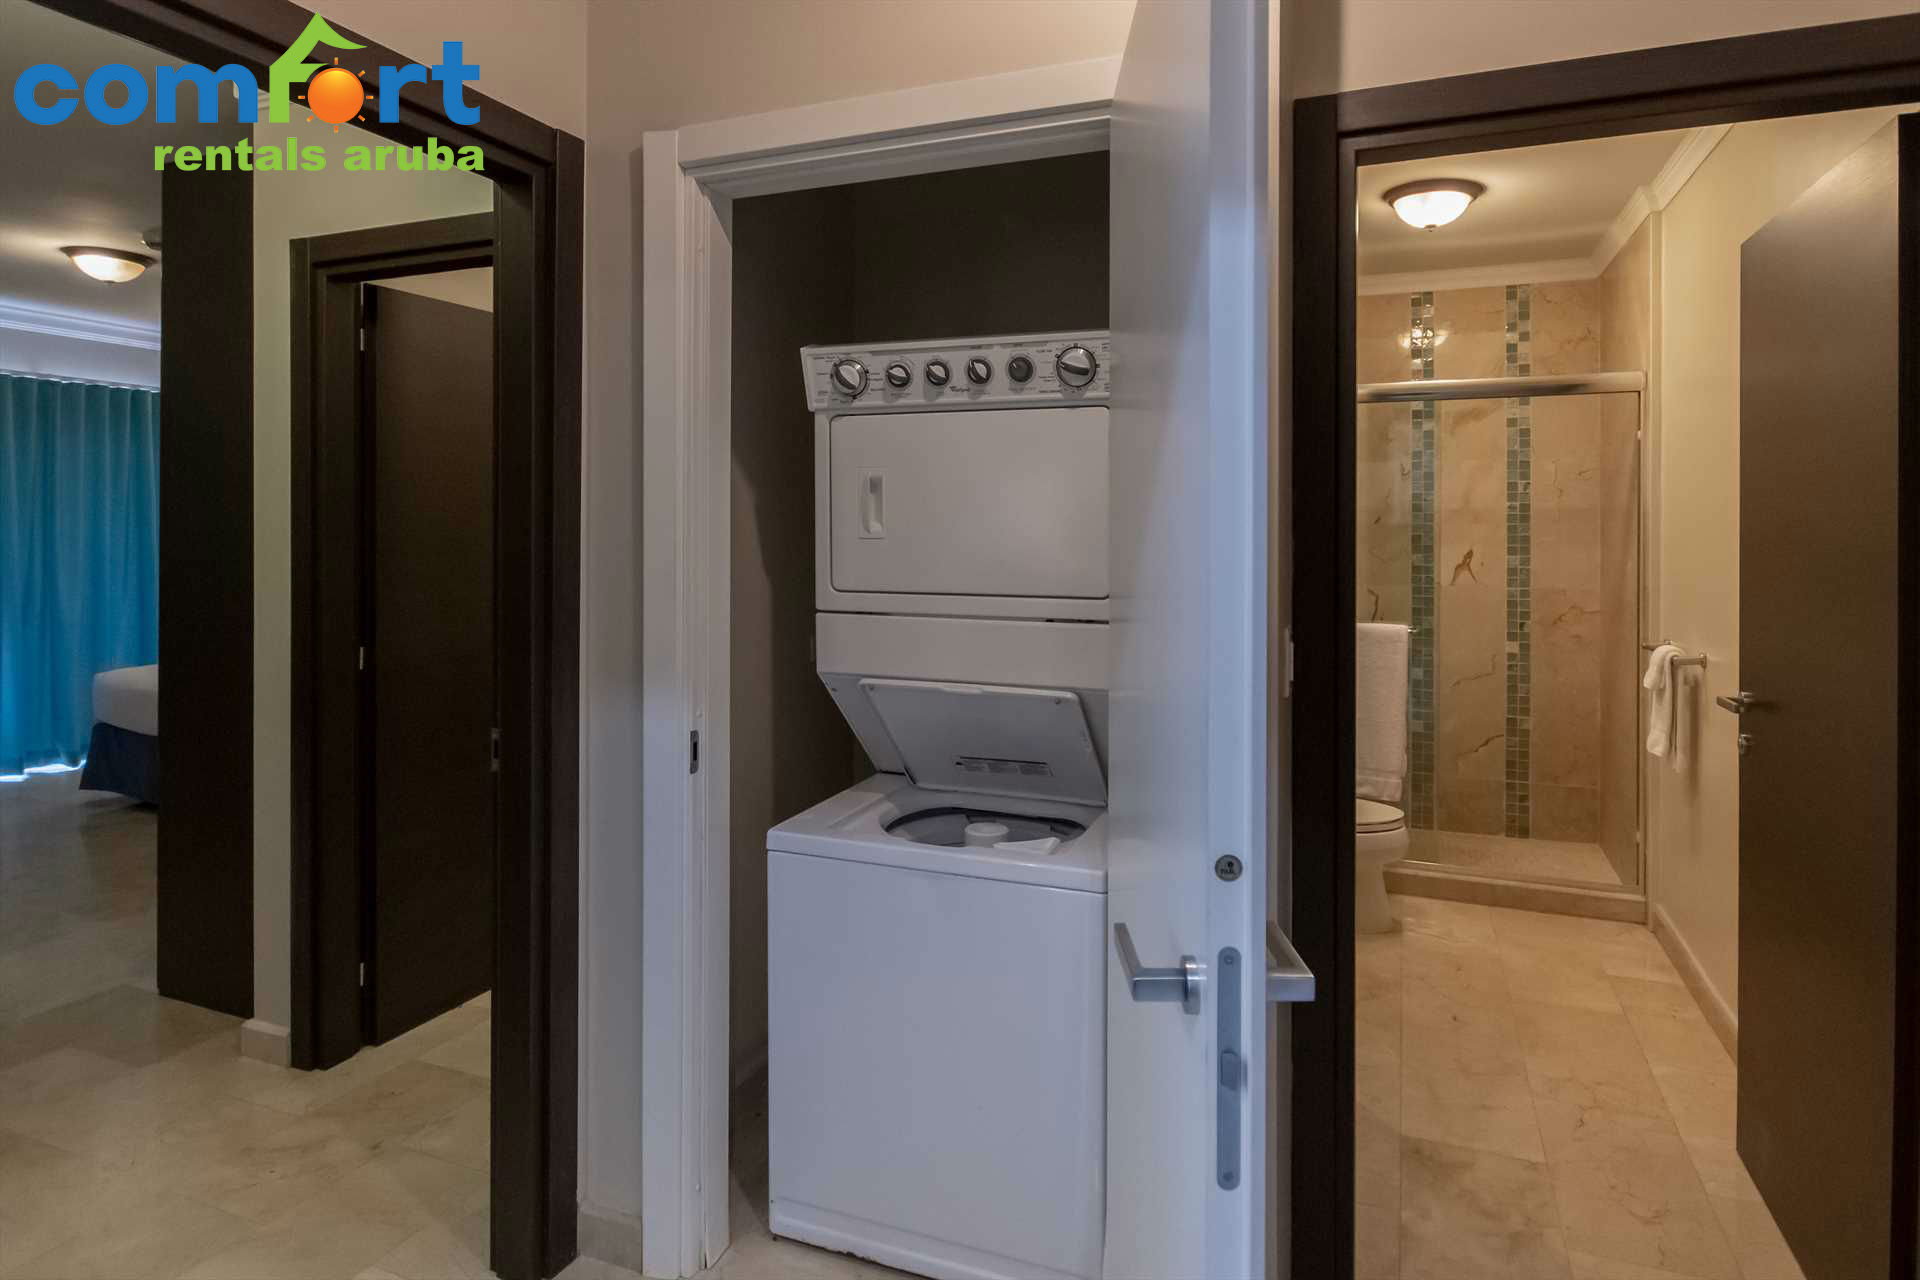 Washer and dryer are conveniently located in the condo